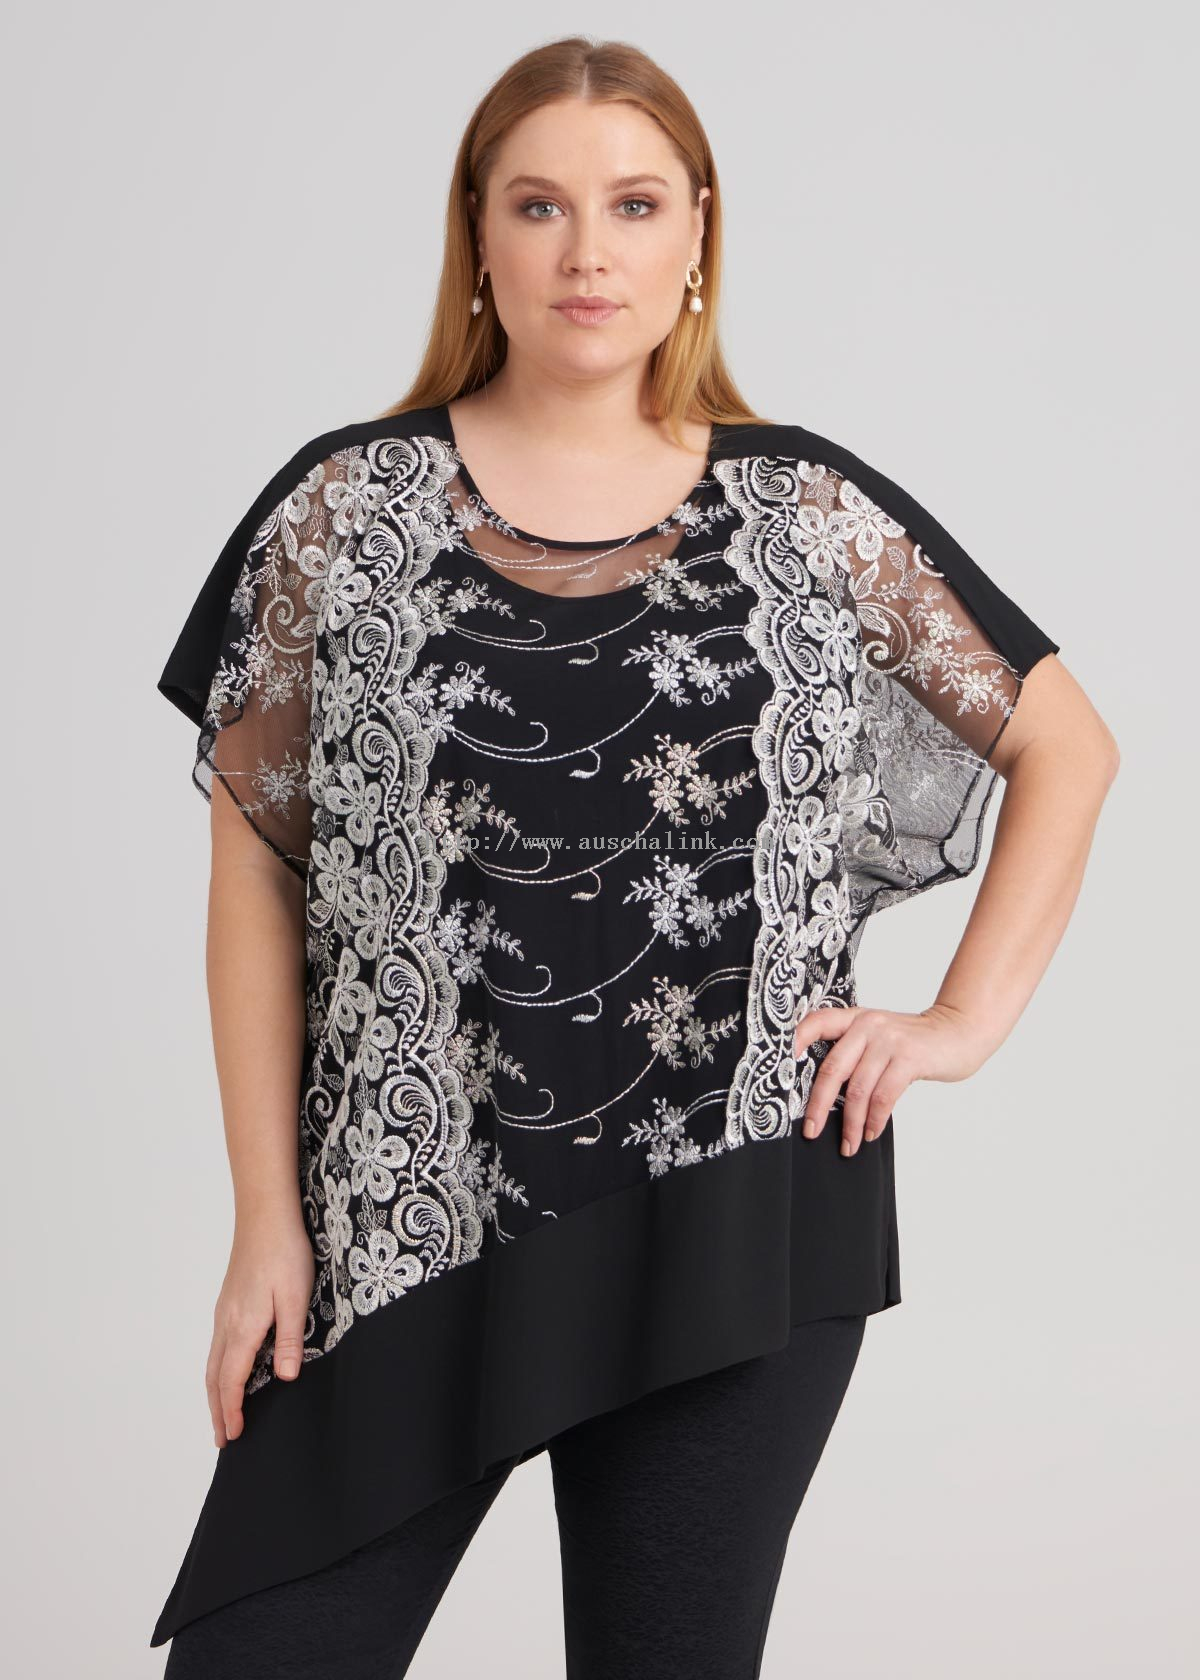 Short Sleeve Embroidery Top